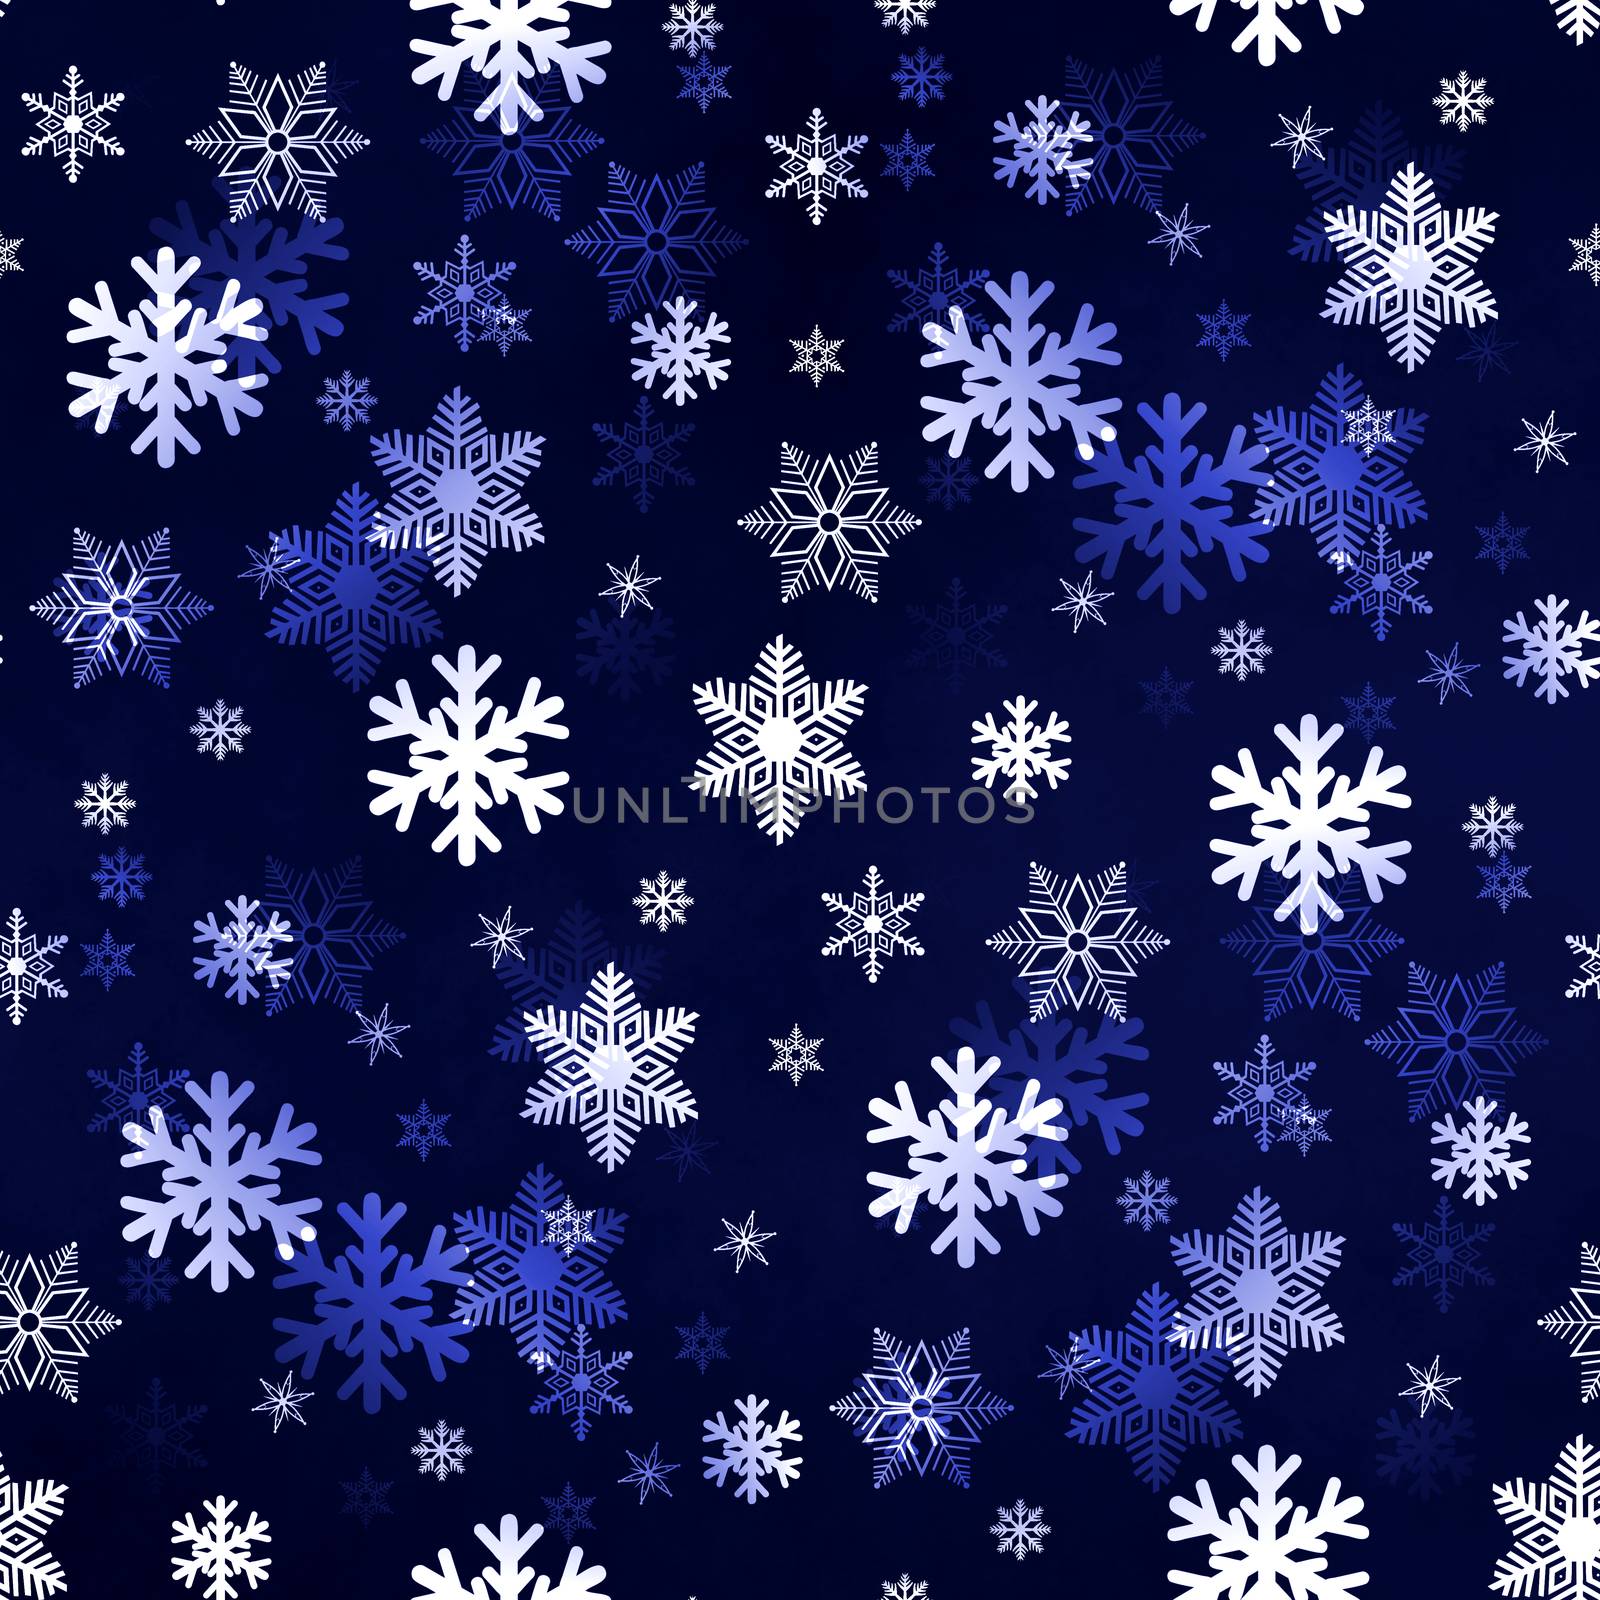 Dark blue winter Christmas snowflakes with a seamless pattern as background image.